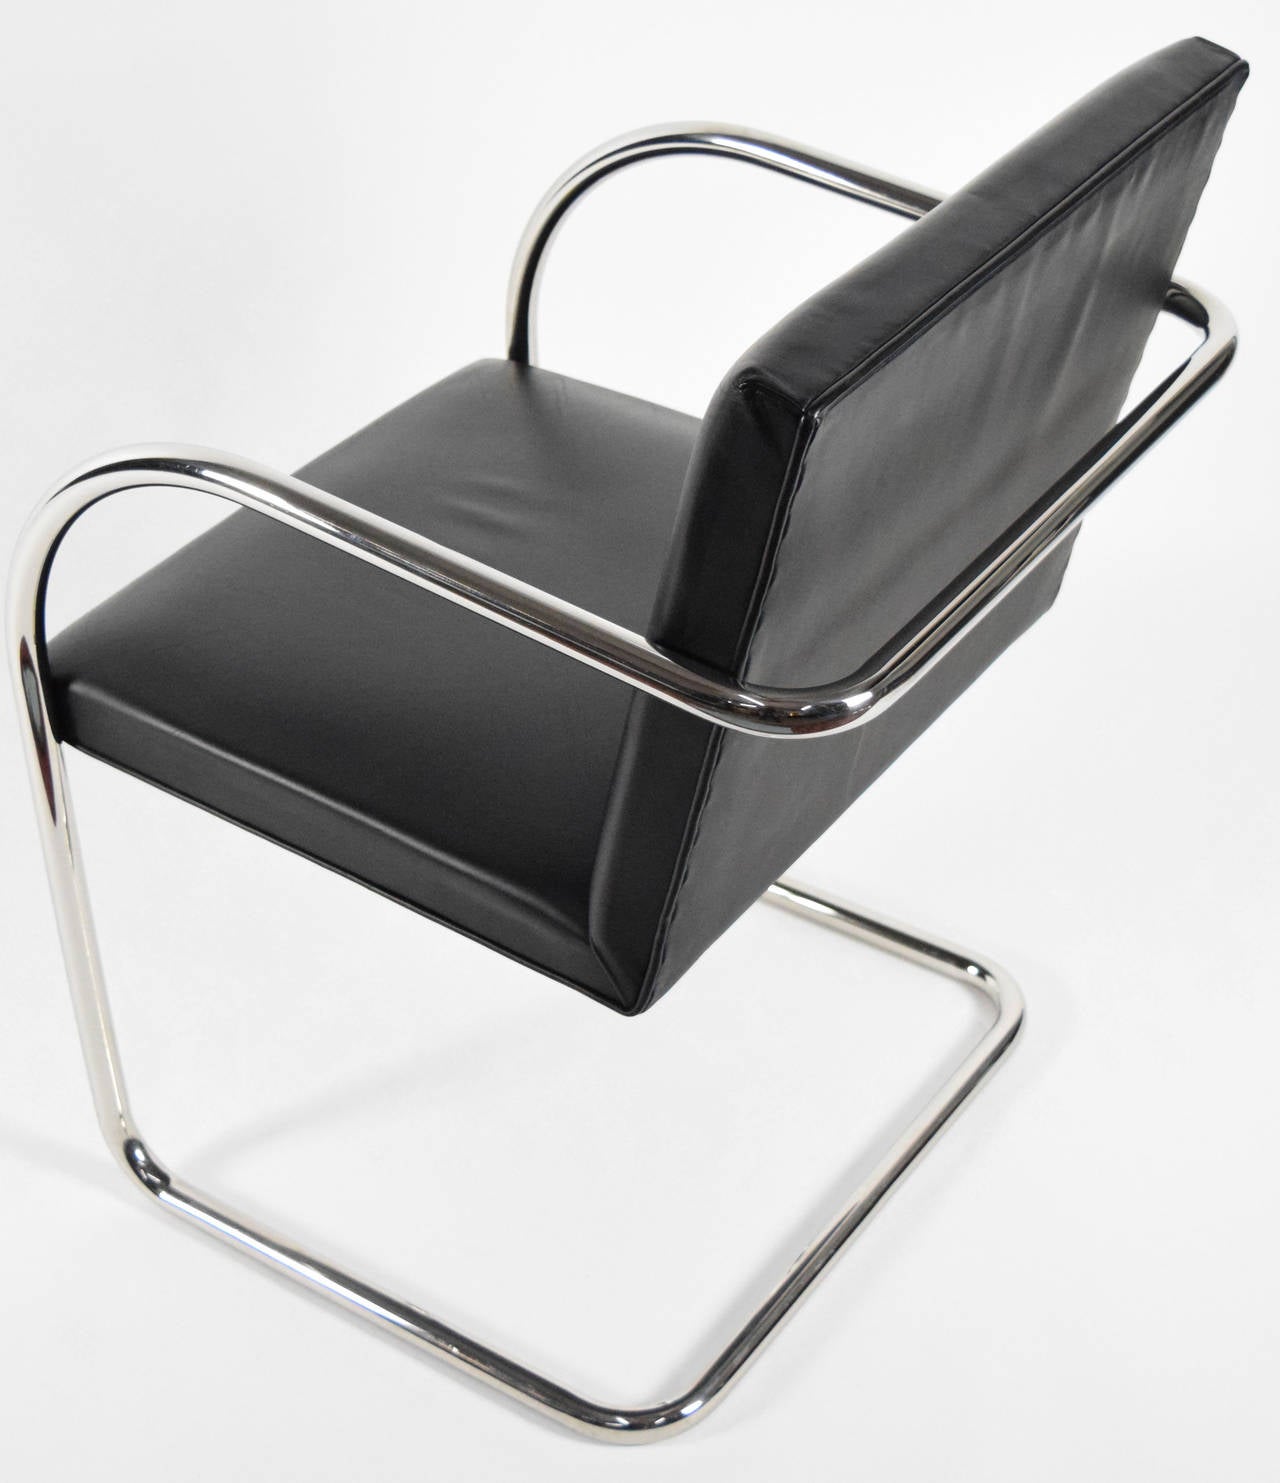 American Fourteen Tubular Brno Chairs by Mies van der Rohe for Knoll